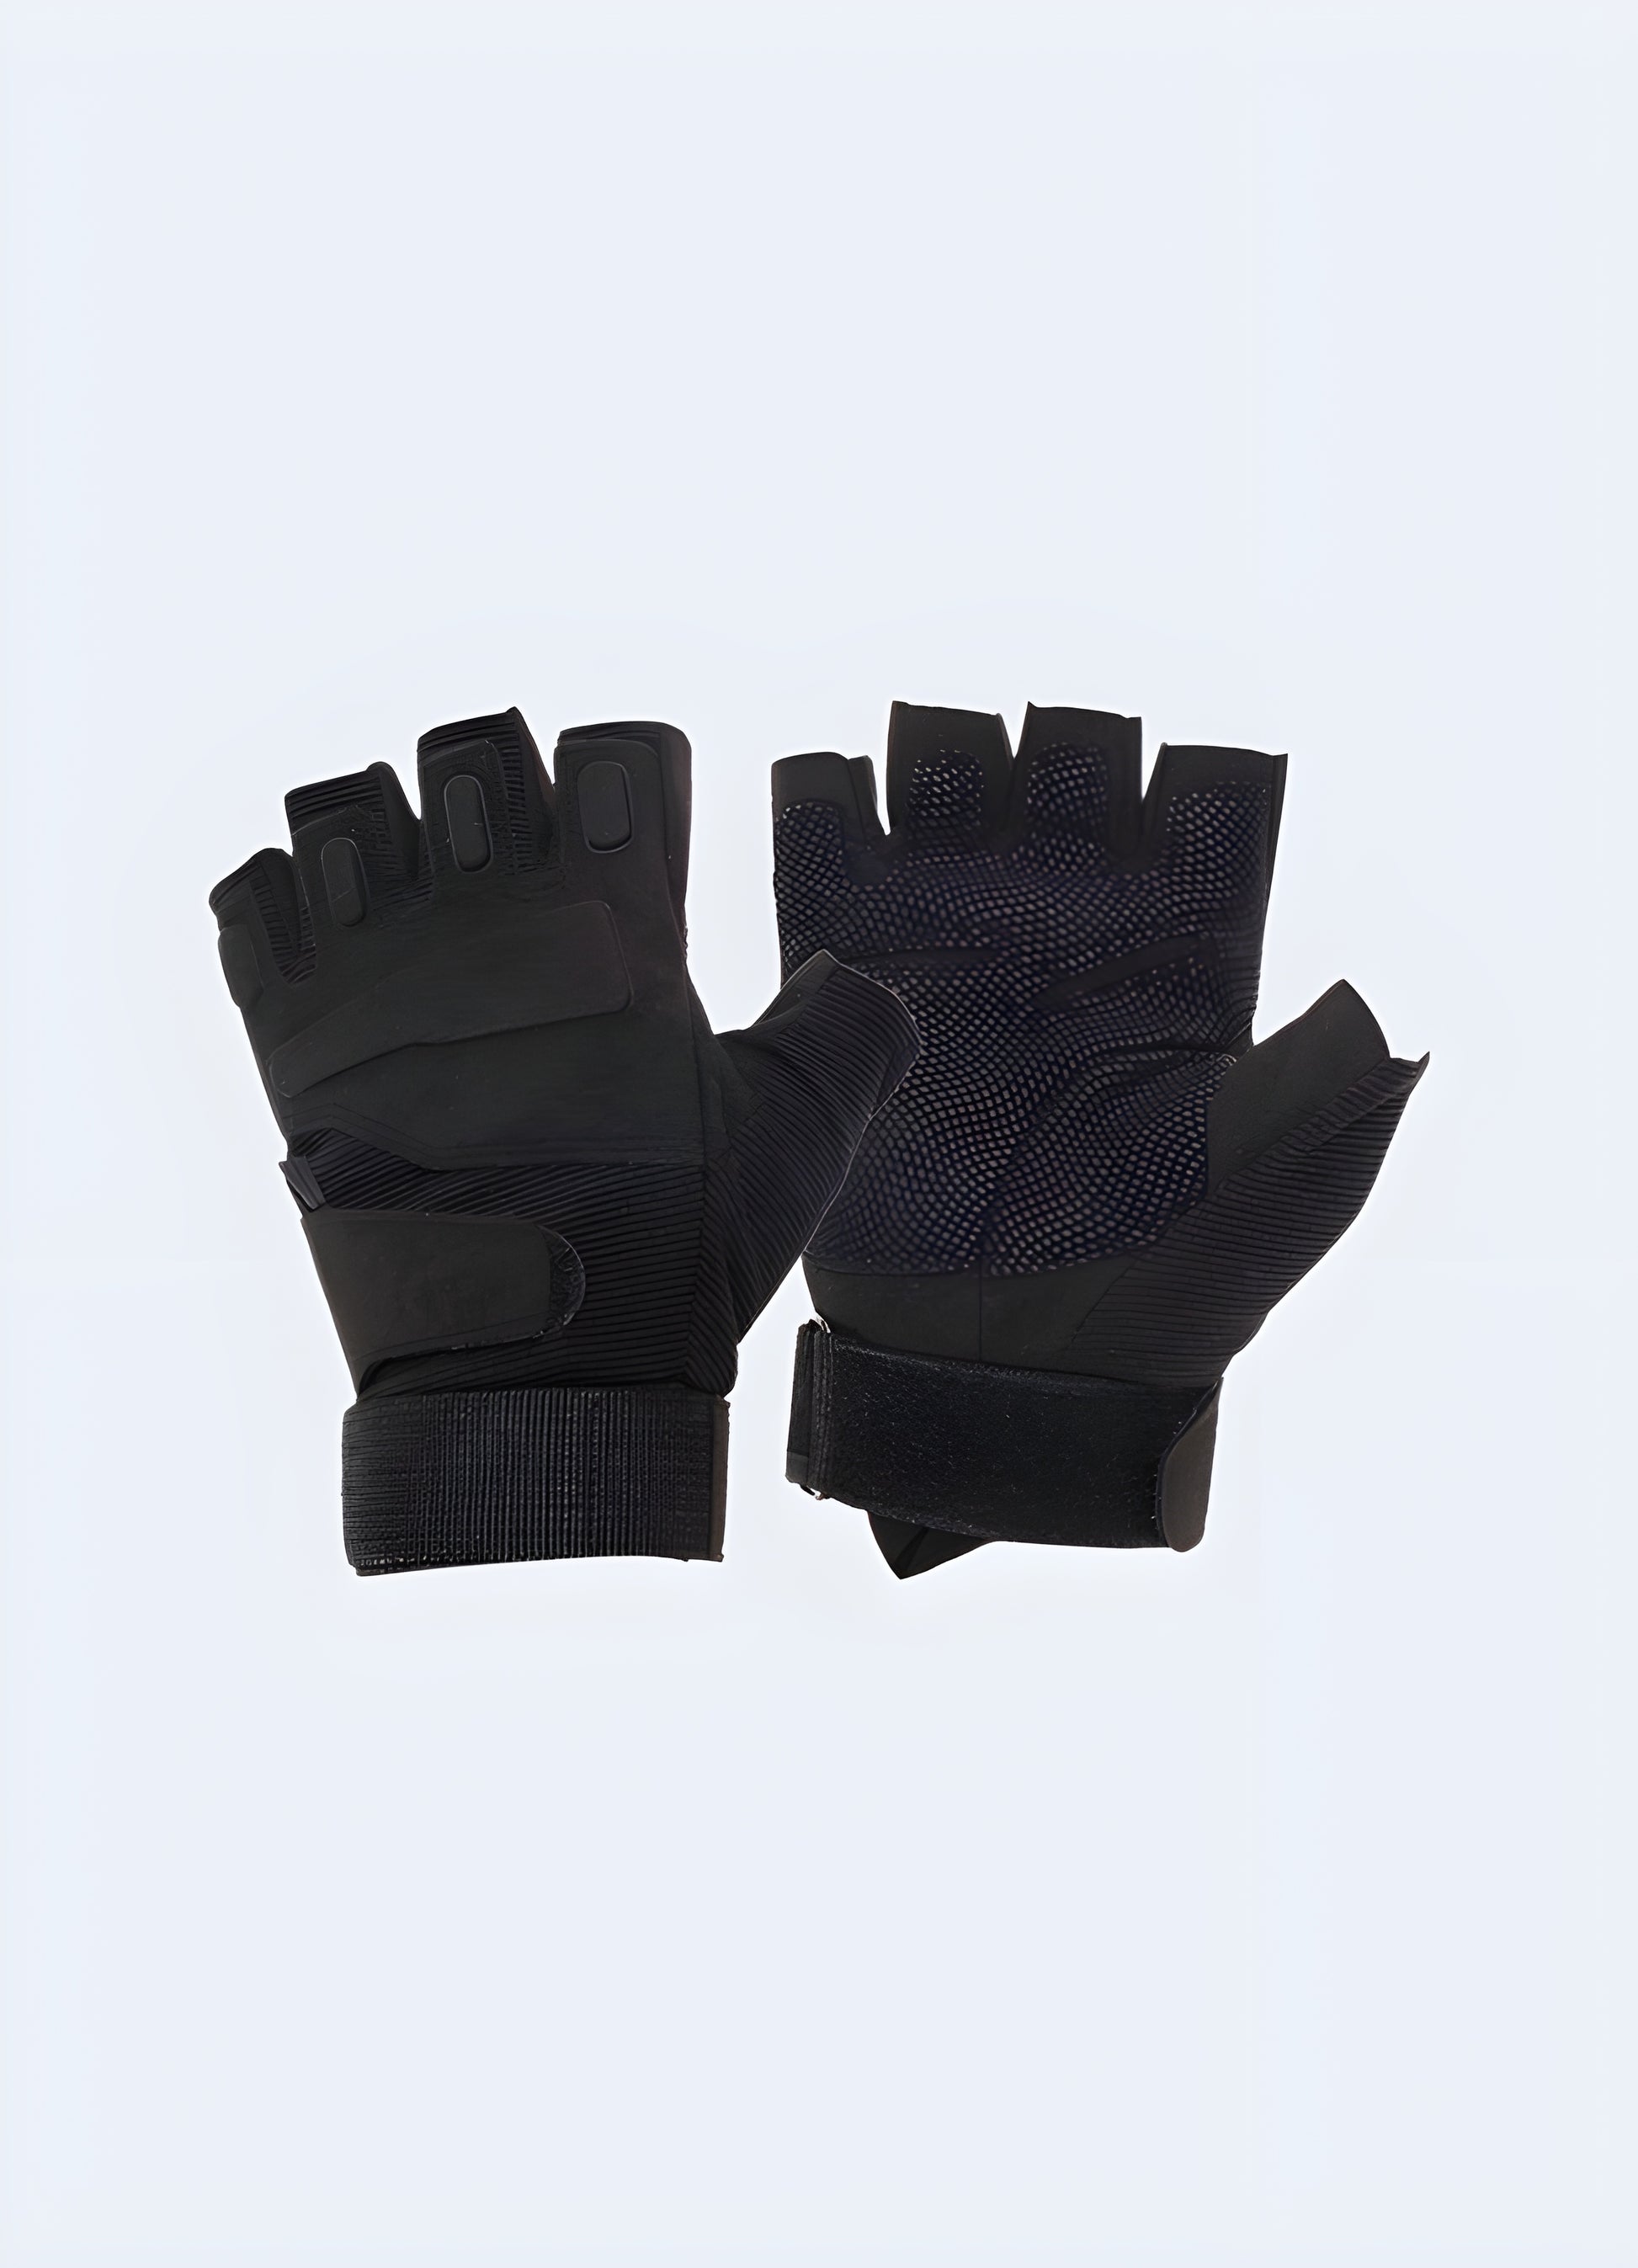 Black tactical fingerless gloves both view.